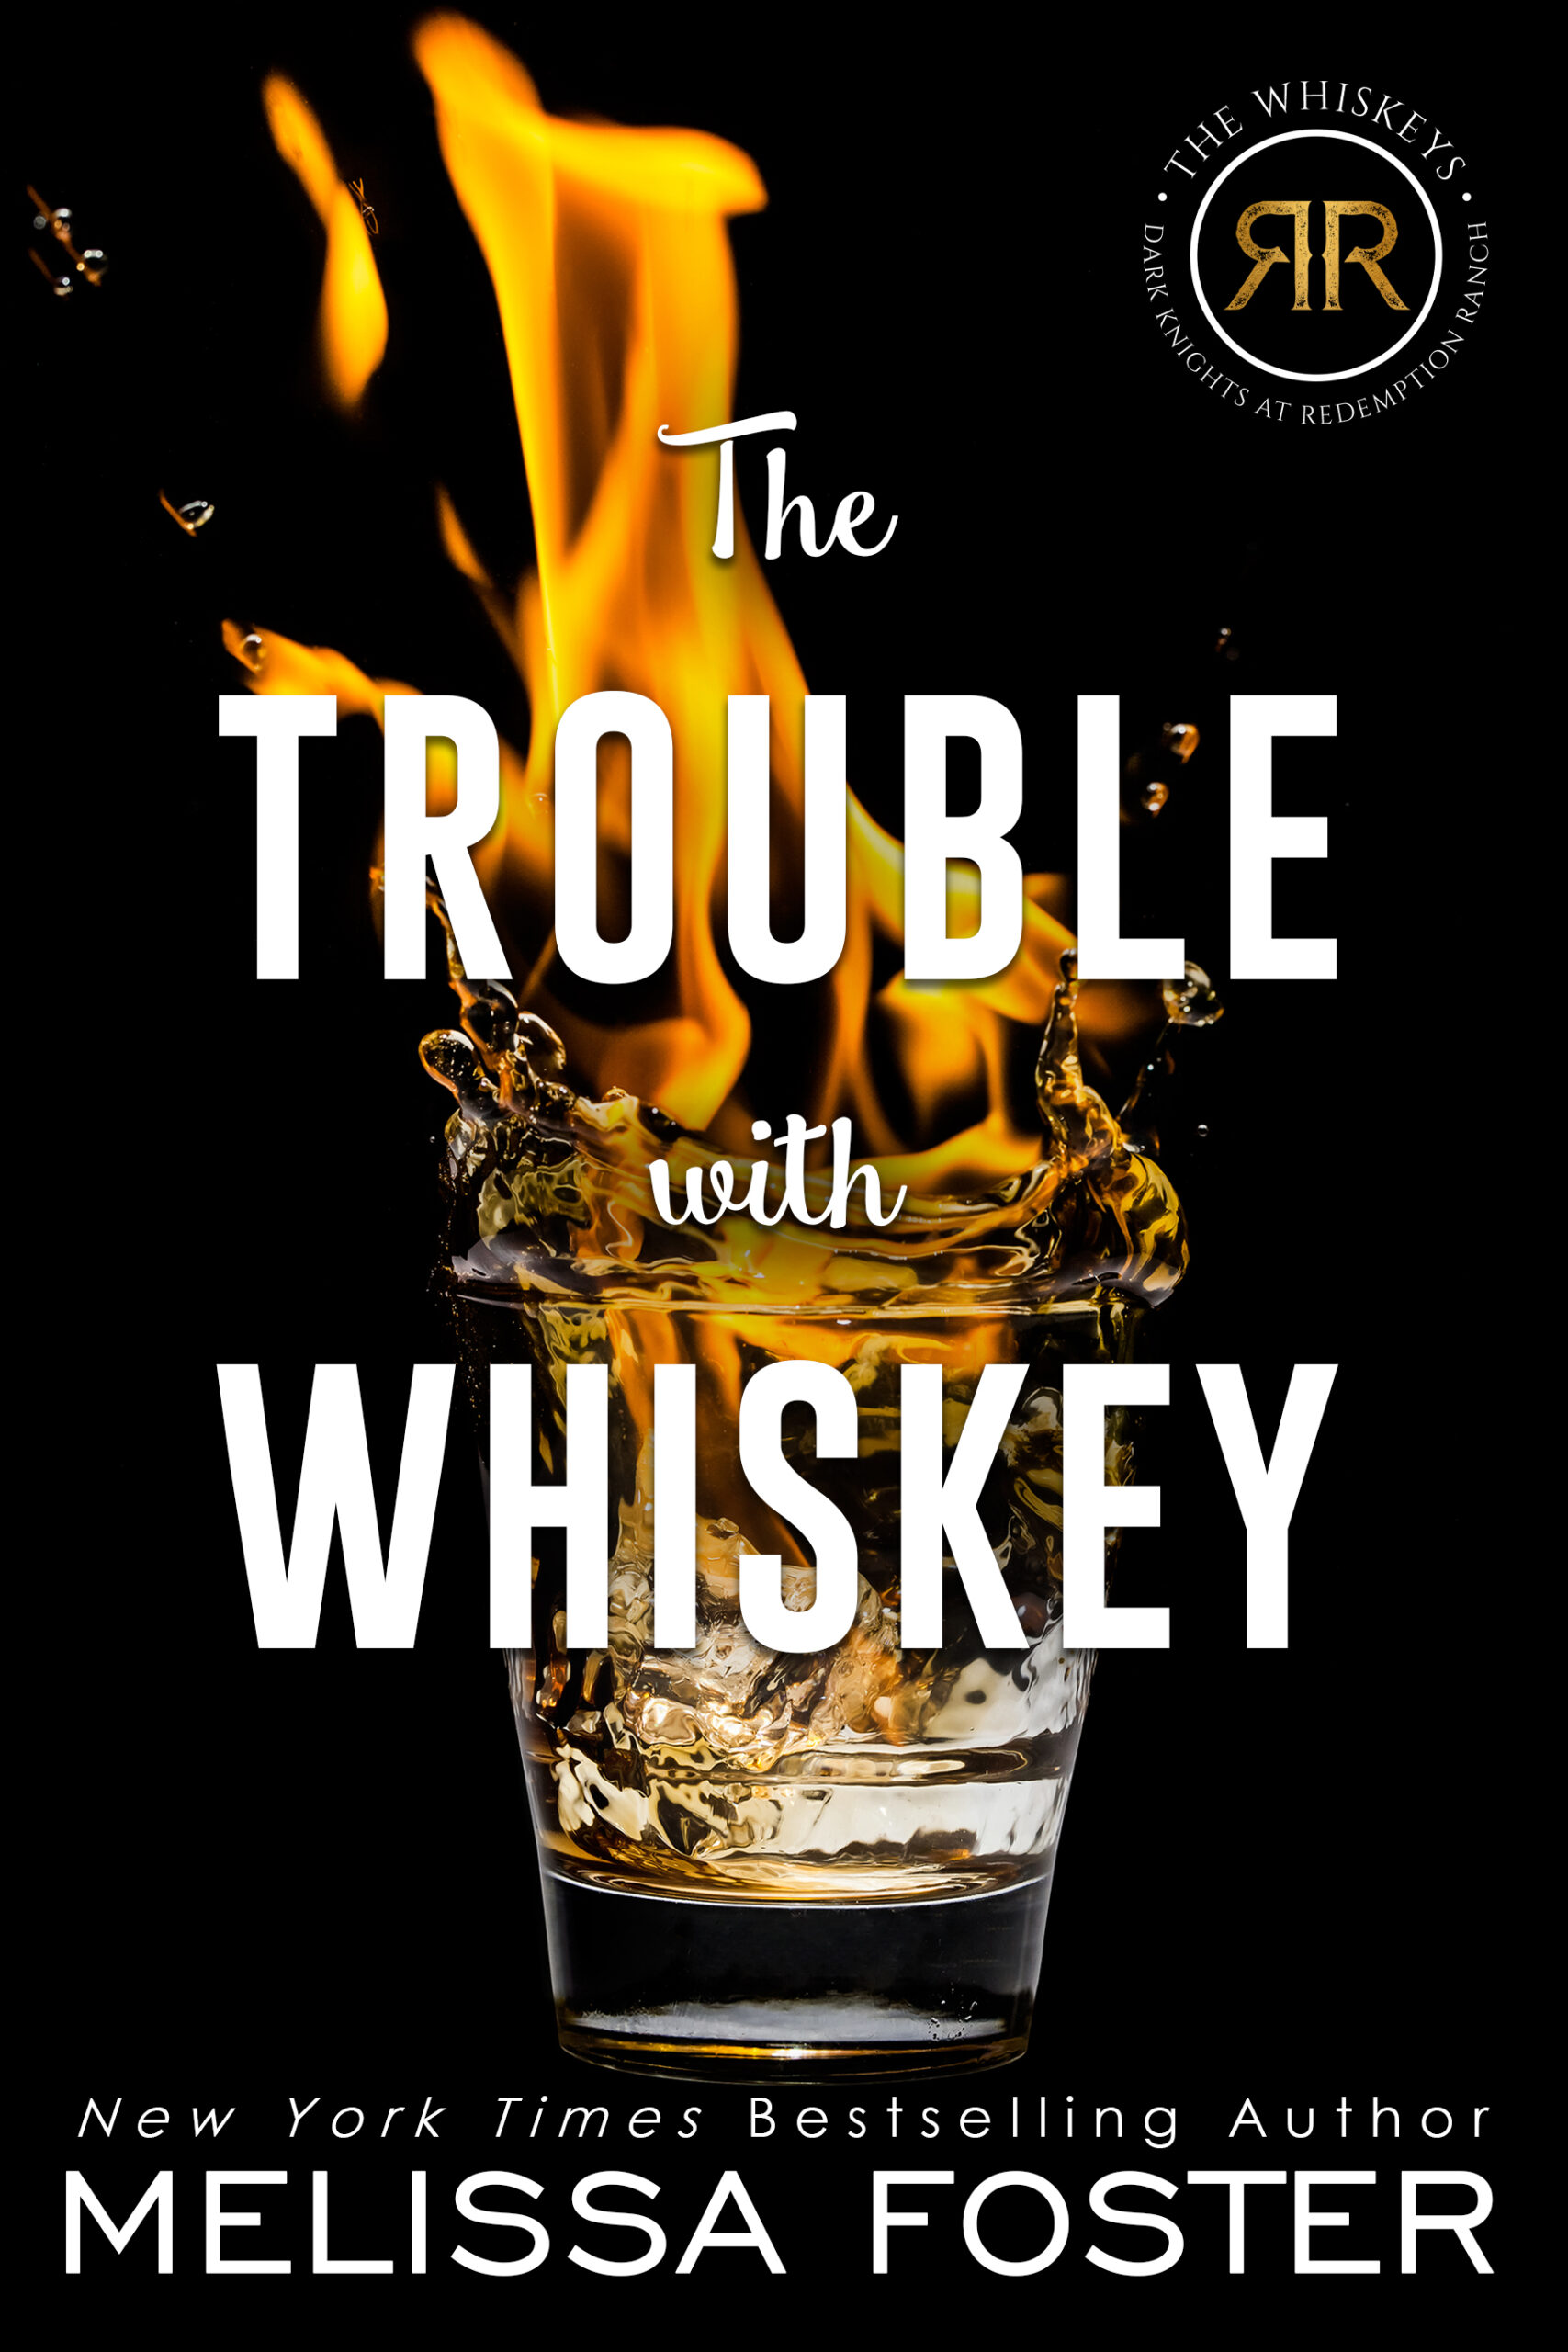 The Trouble with Whiskey Special Editions by Melissa Foster